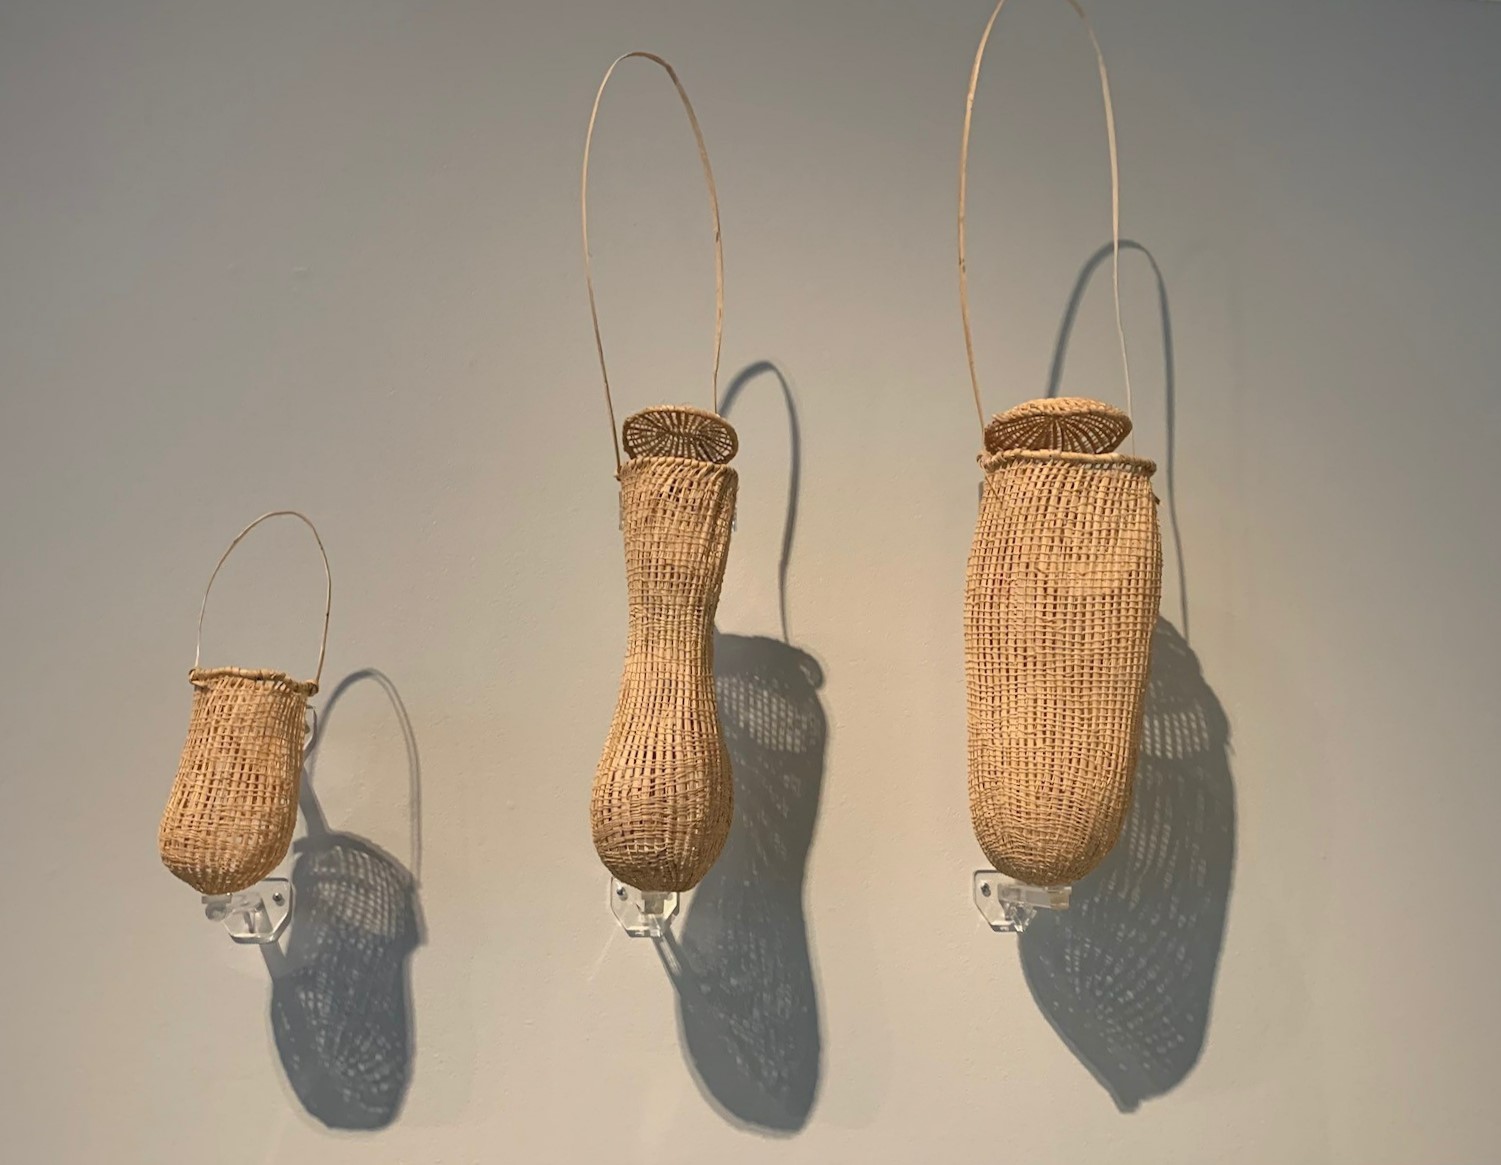 Kakan (dilly bags) – Delissa Walker – On loan for Entwined courtesy of Cairns Art Gallery. 